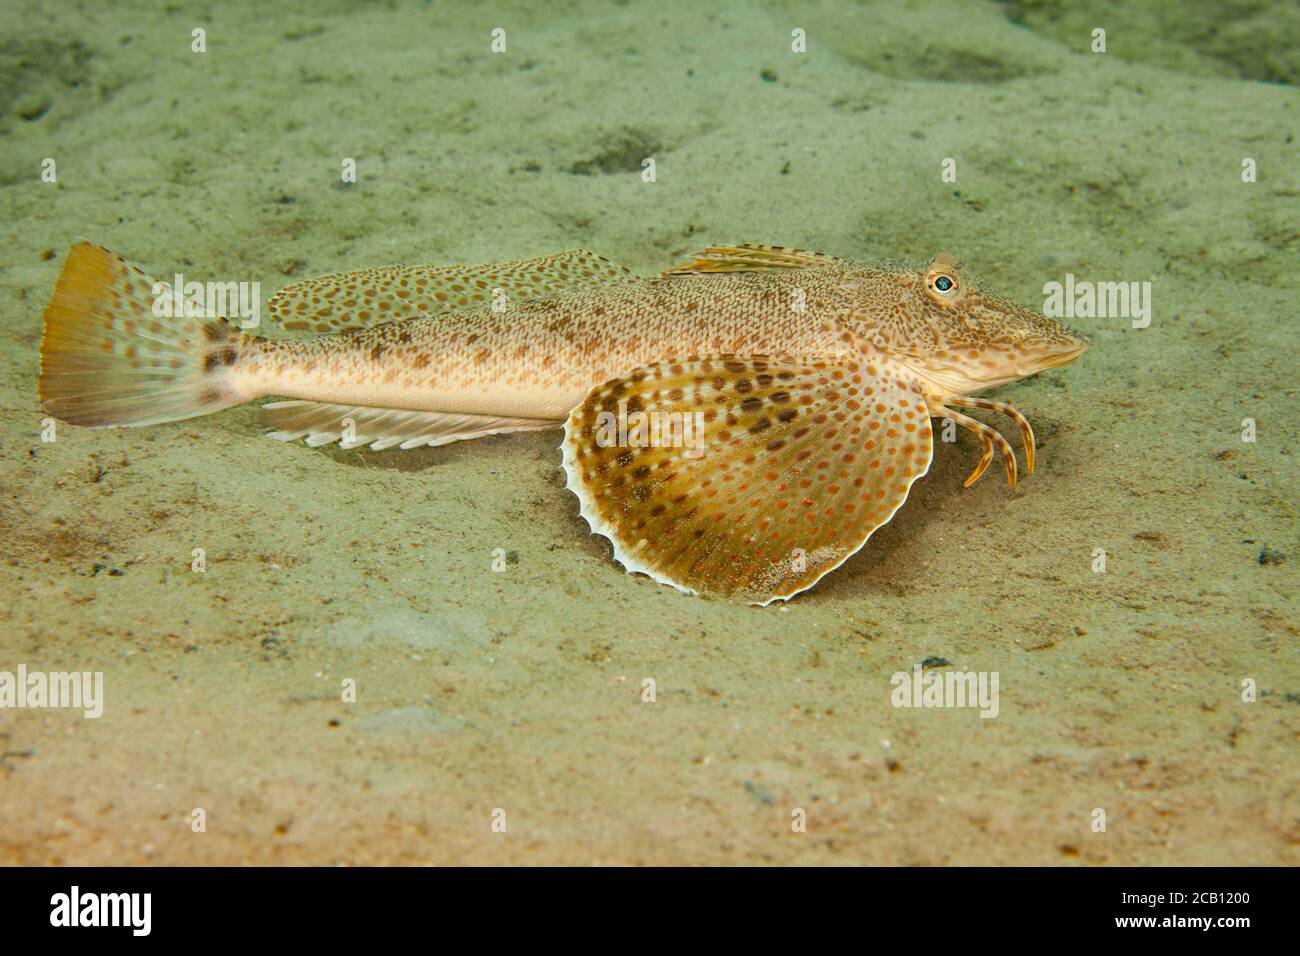 The leopard searobin, Prionotus scitulus, reaches 10 inches in length and is uncommon in Florida, USA. Stock Photo